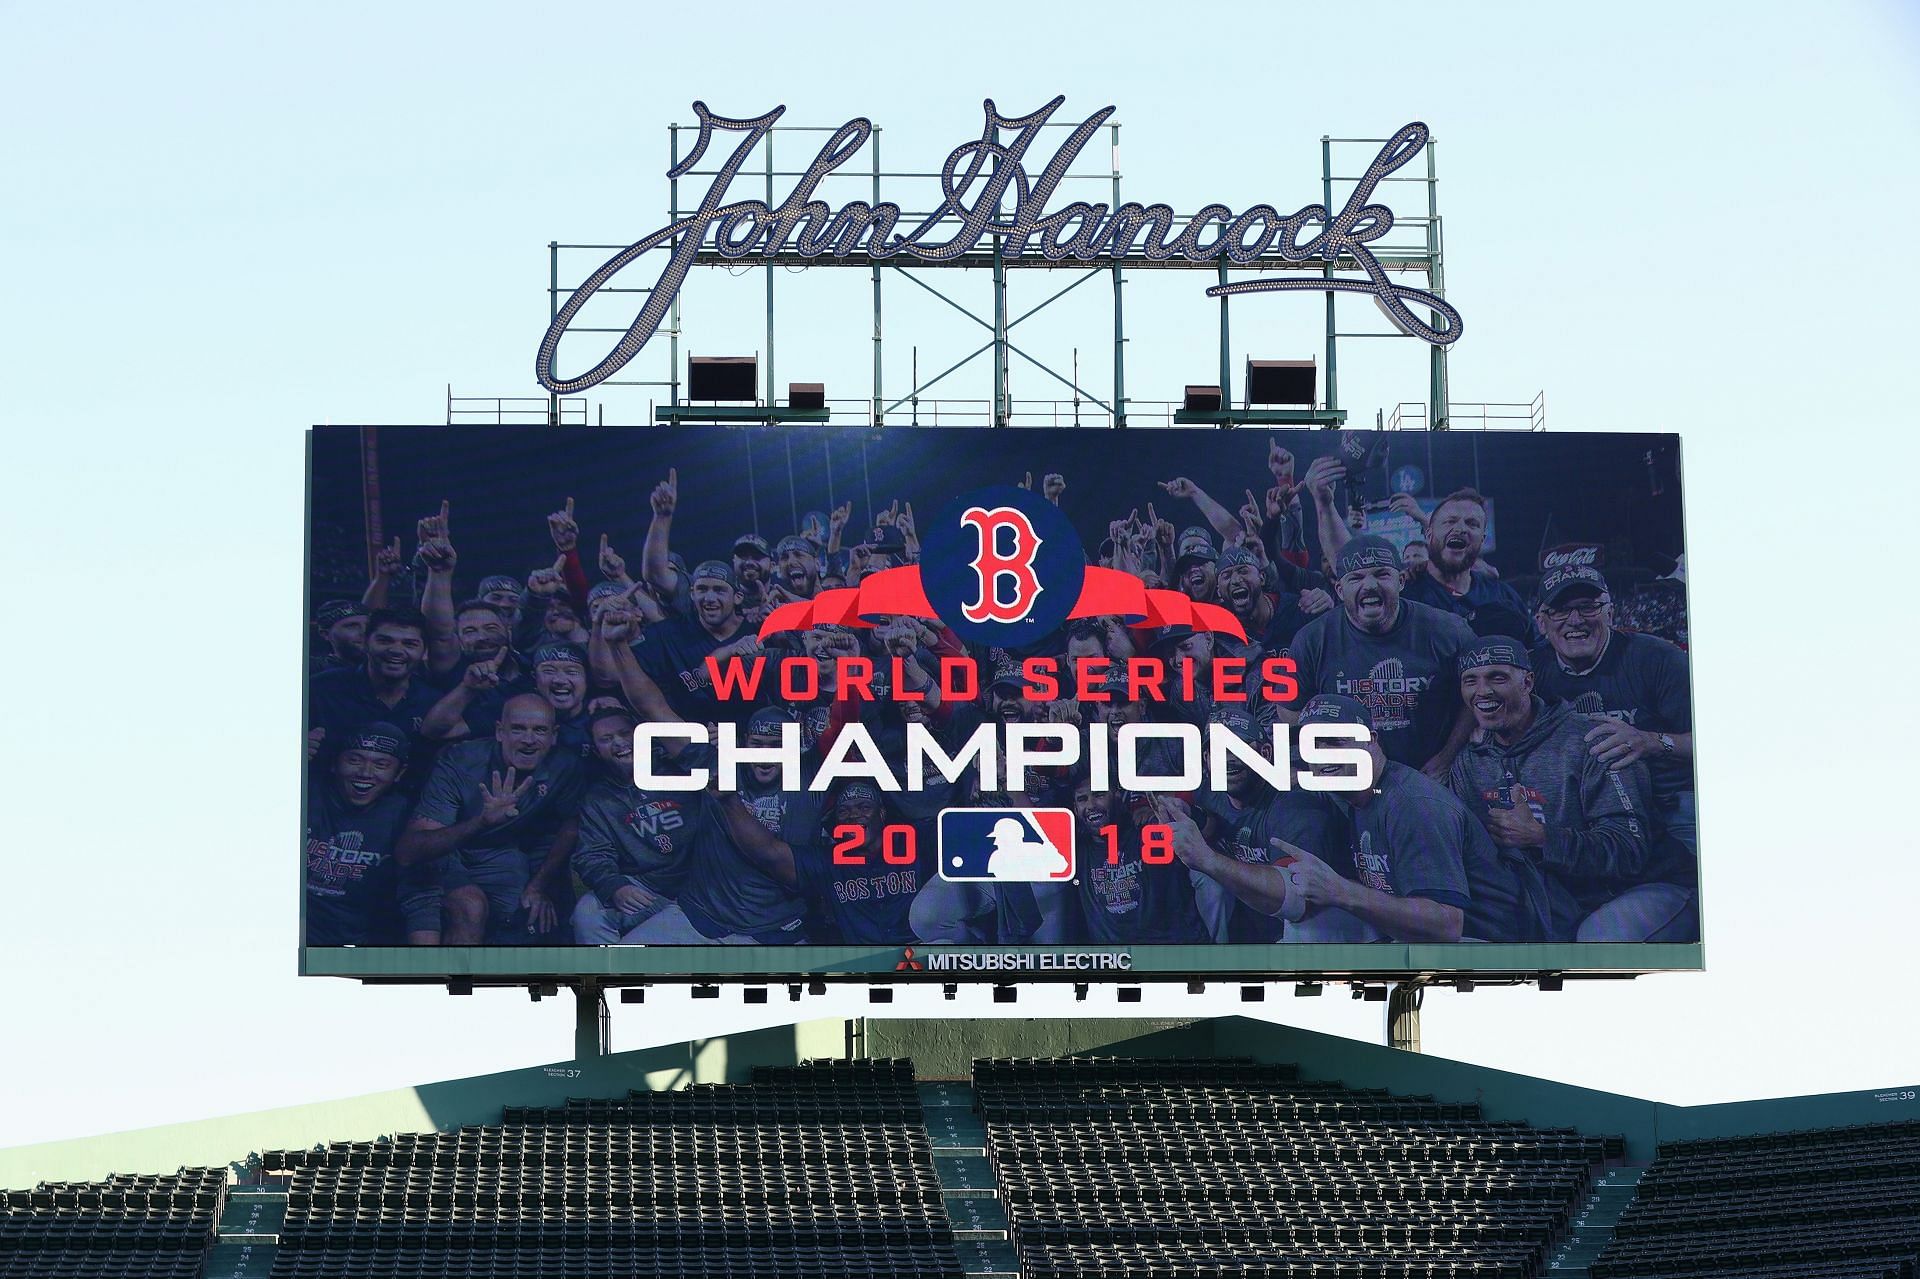 orld Series Champions 2018 signage in the outfield before the Boston Red Sox Victory Parade at Fenway Park